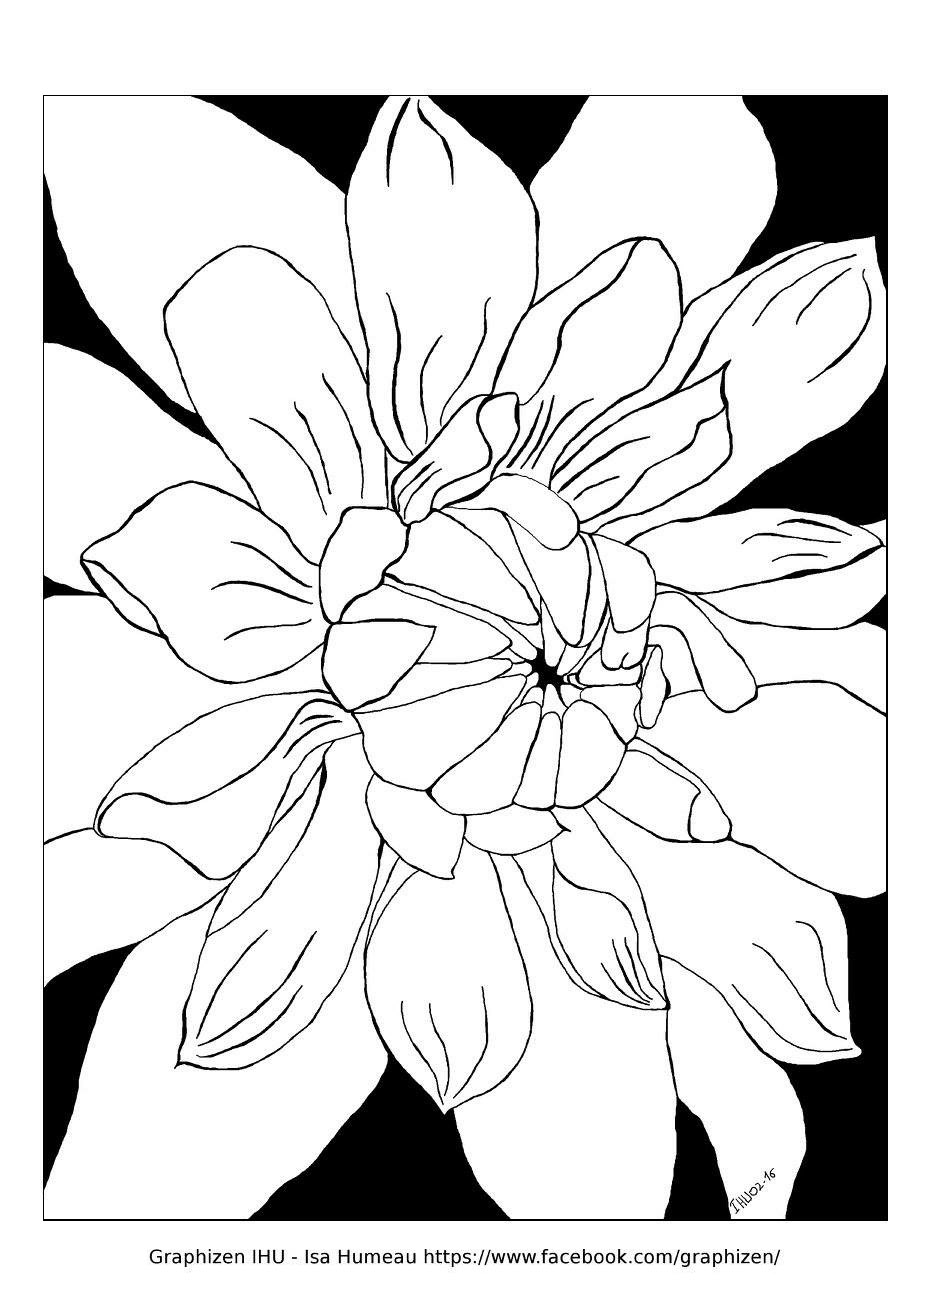 Beautiful flower with large petals, by Graphizen IHU